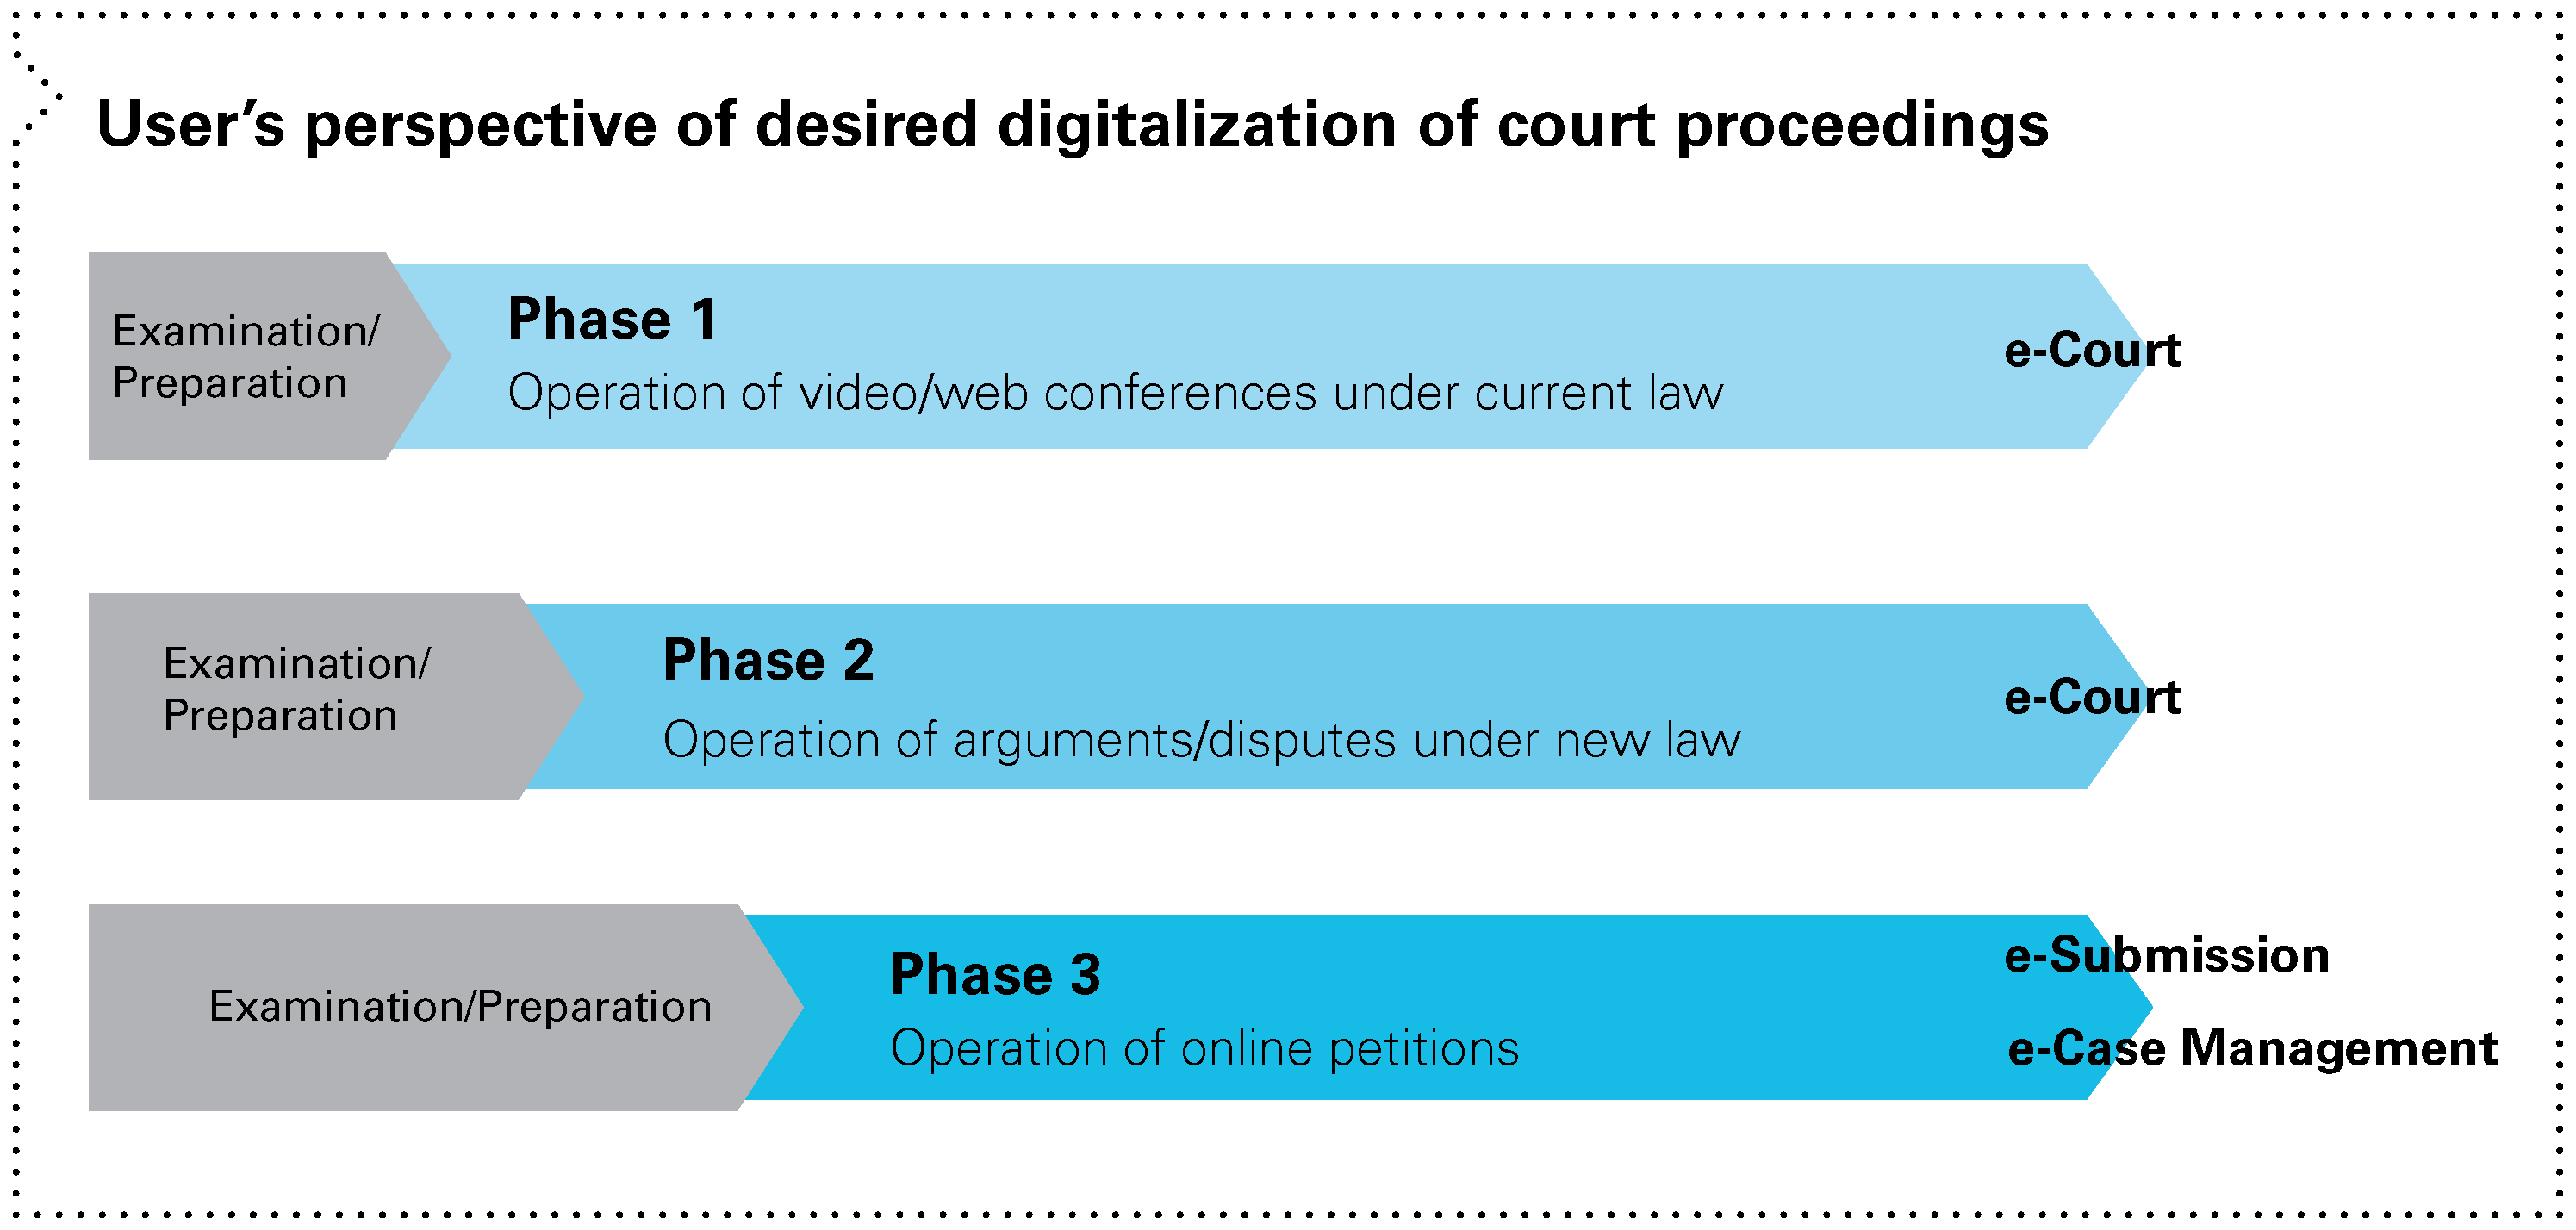 User's perspective of desired digitalization of court proceedings